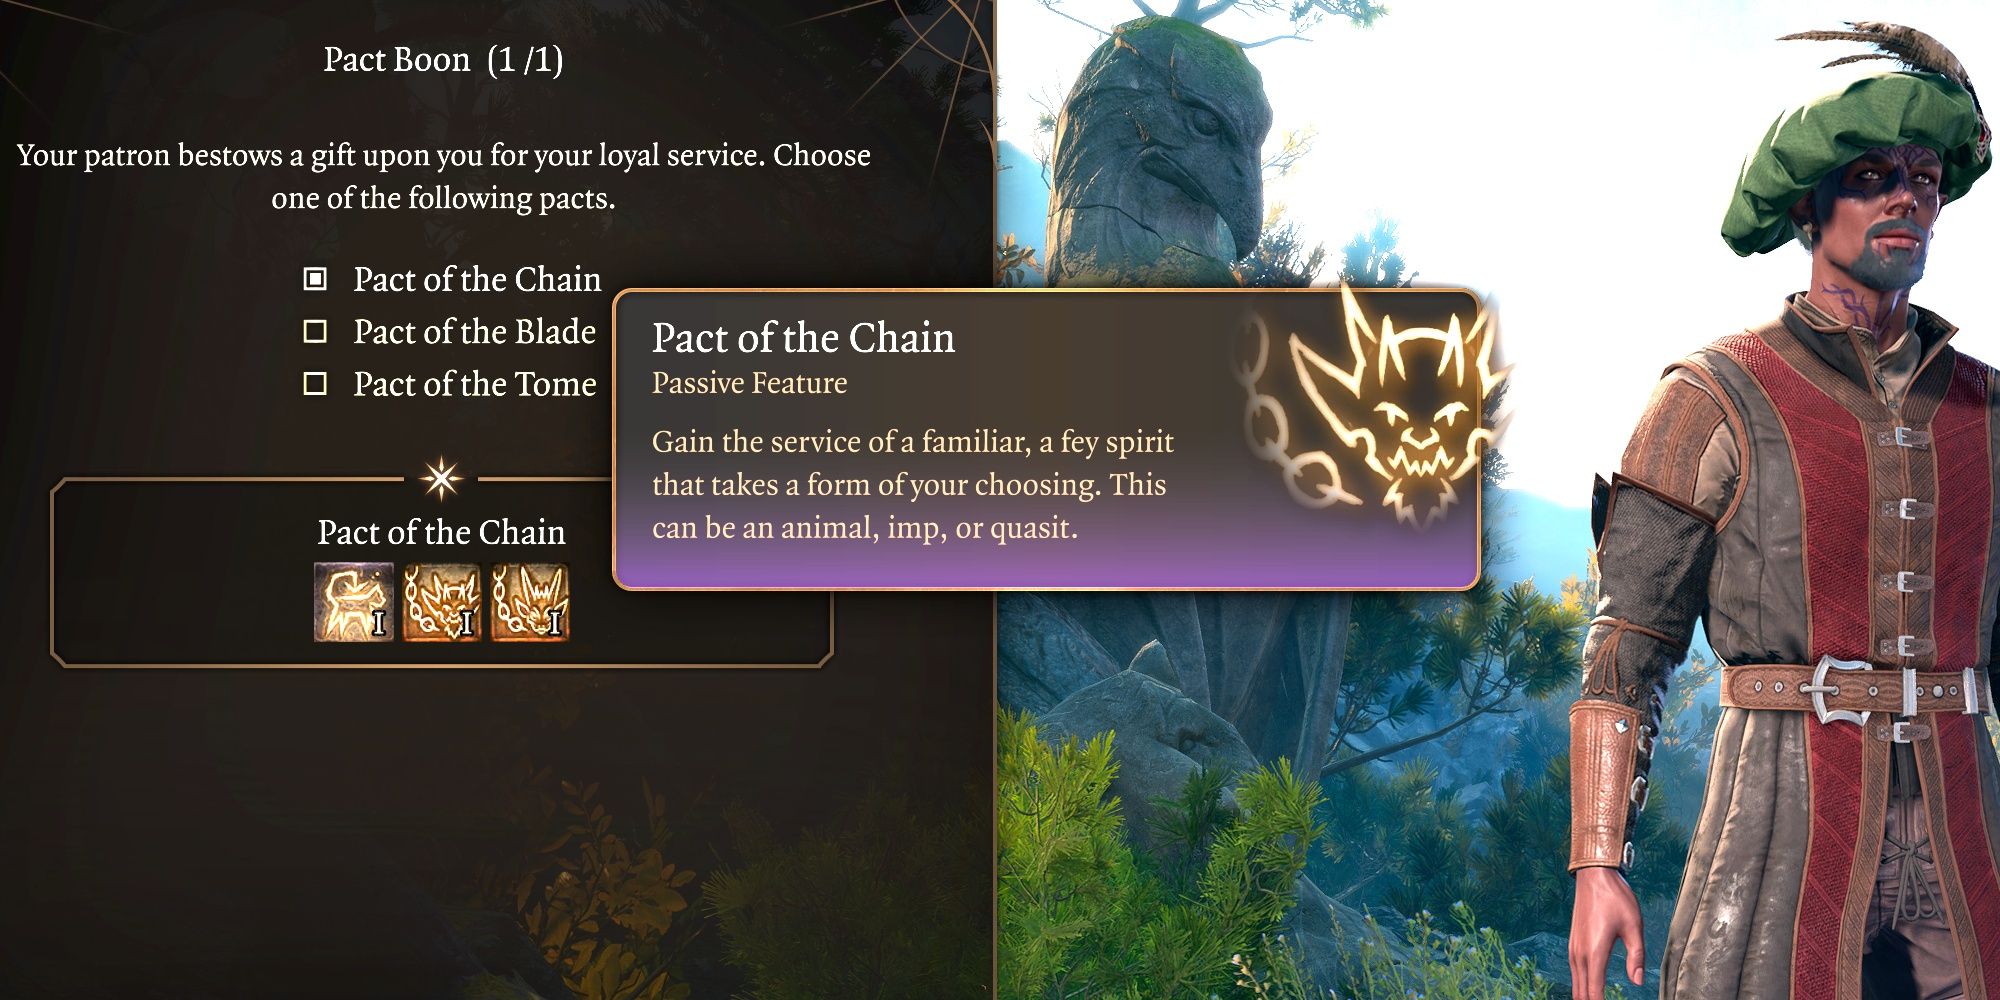 Baldur's Gate 3 Warlock Pact list shown with Pact of the Chain selected for multiple pets